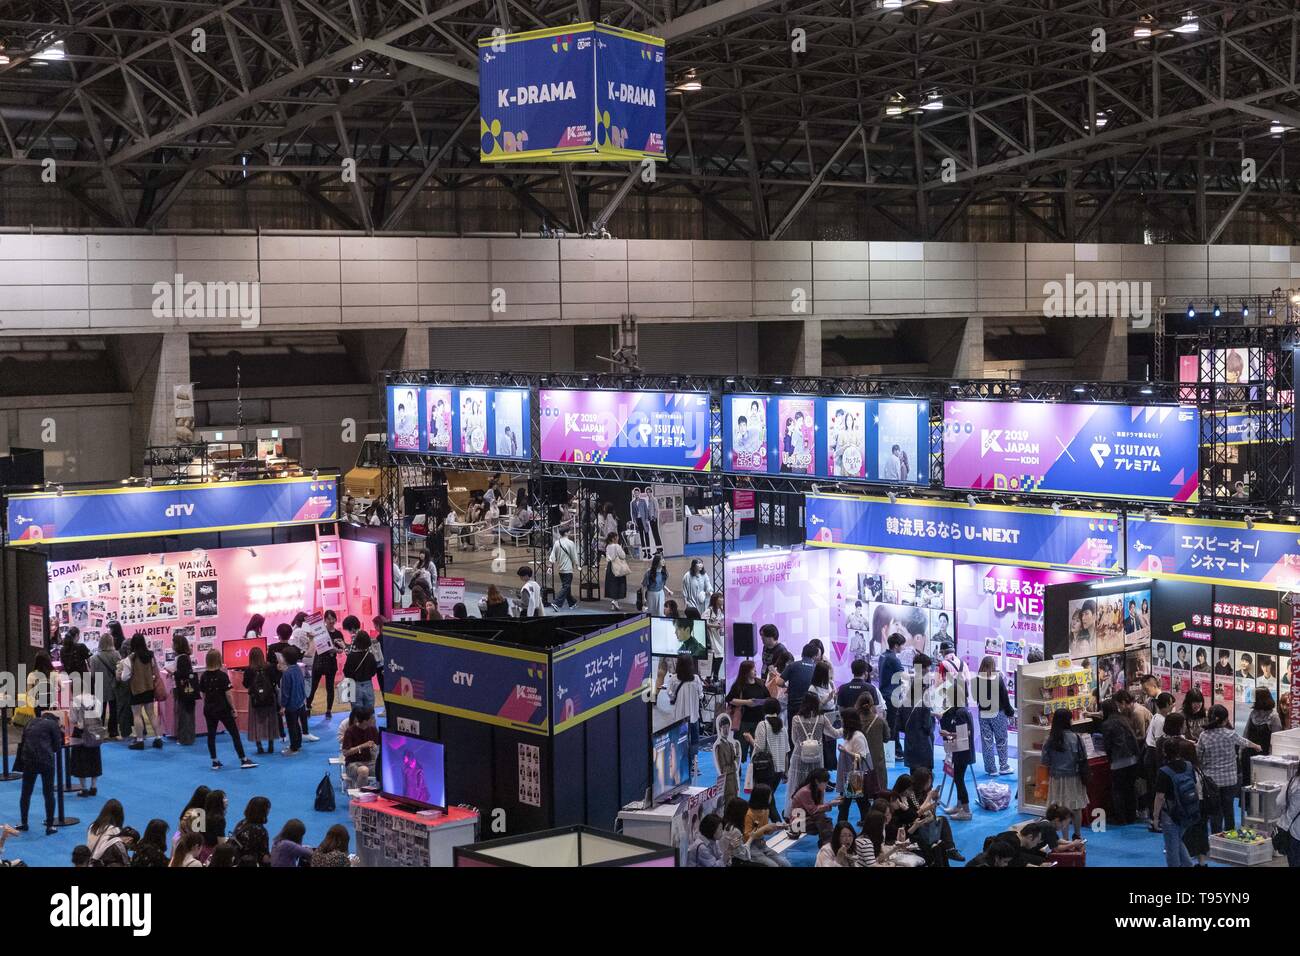 Chiba Japan 17th May 19 Visitors Gather During The Kcon 19 Japan At Makuhari Messe Convention Center The Kcon Aims To Promote South Korea S Culture Including K Pop Fashion Food And Tv Shows